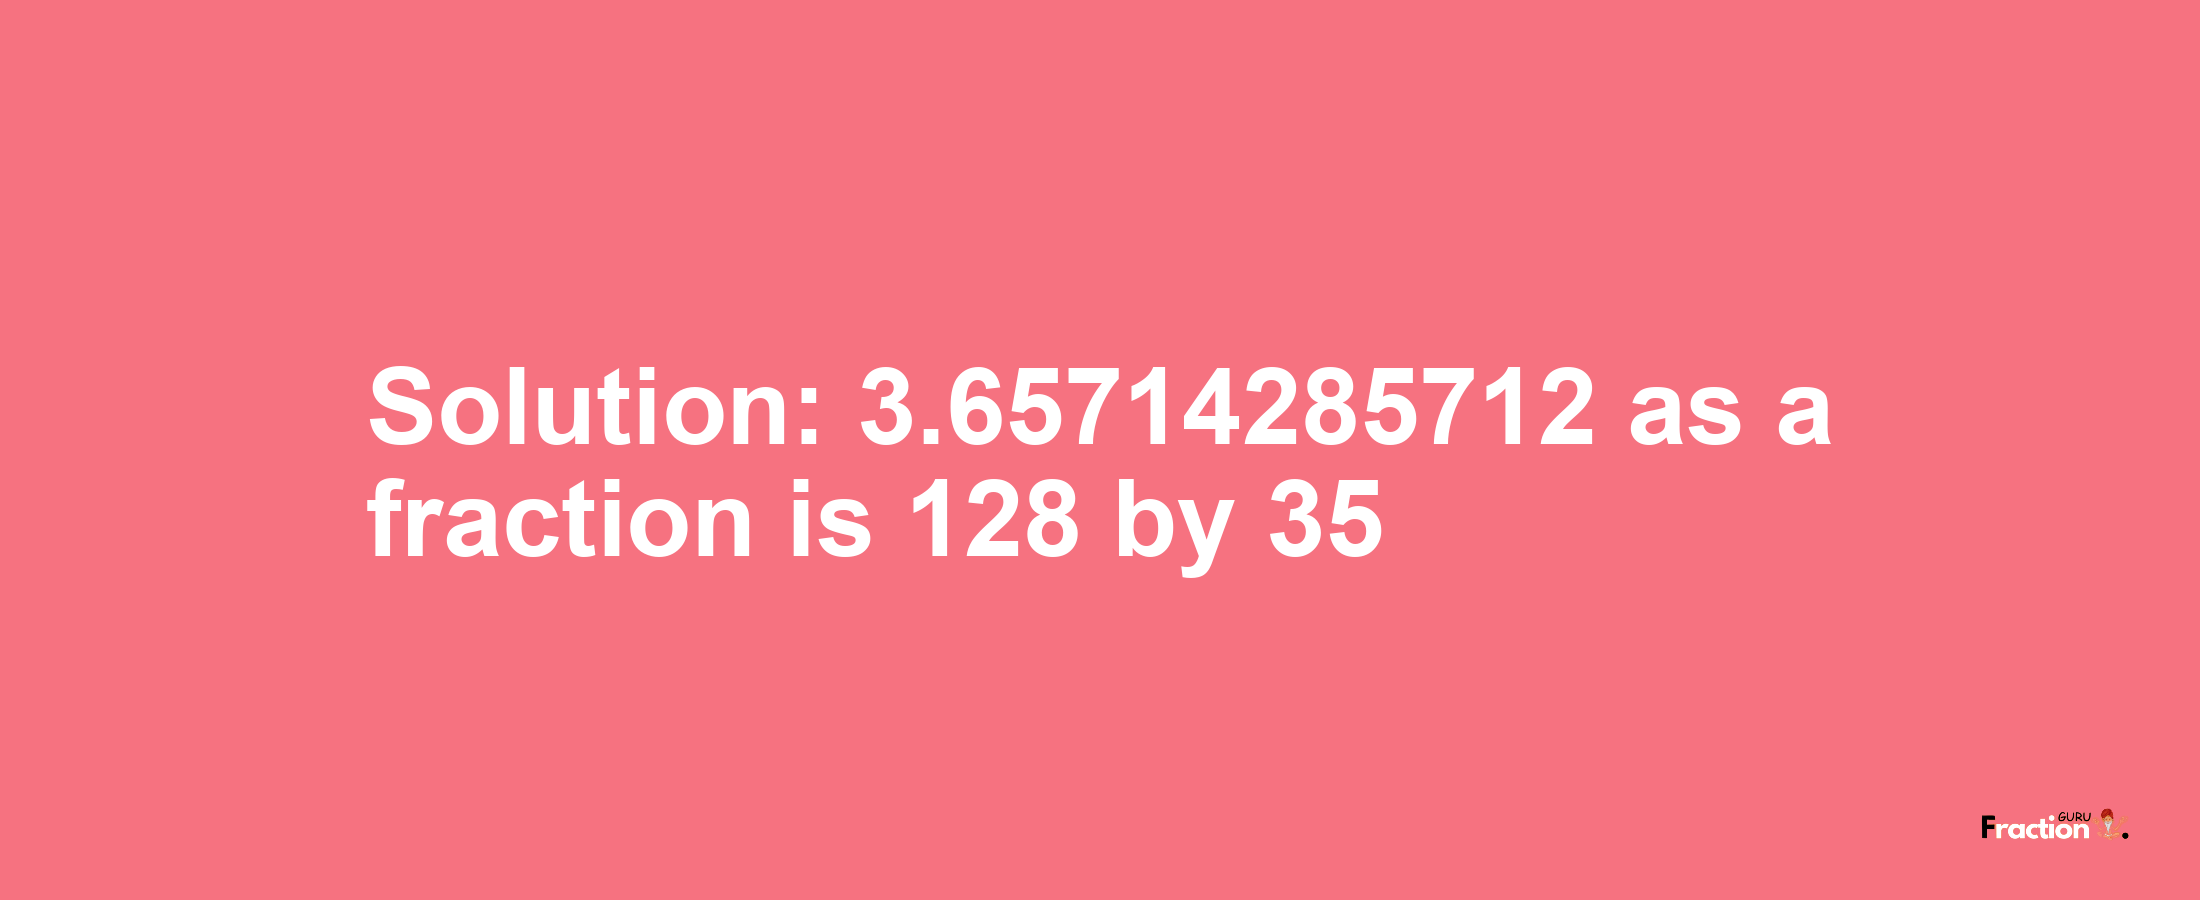 Solution:3.65714285712 as a fraction is 128/35